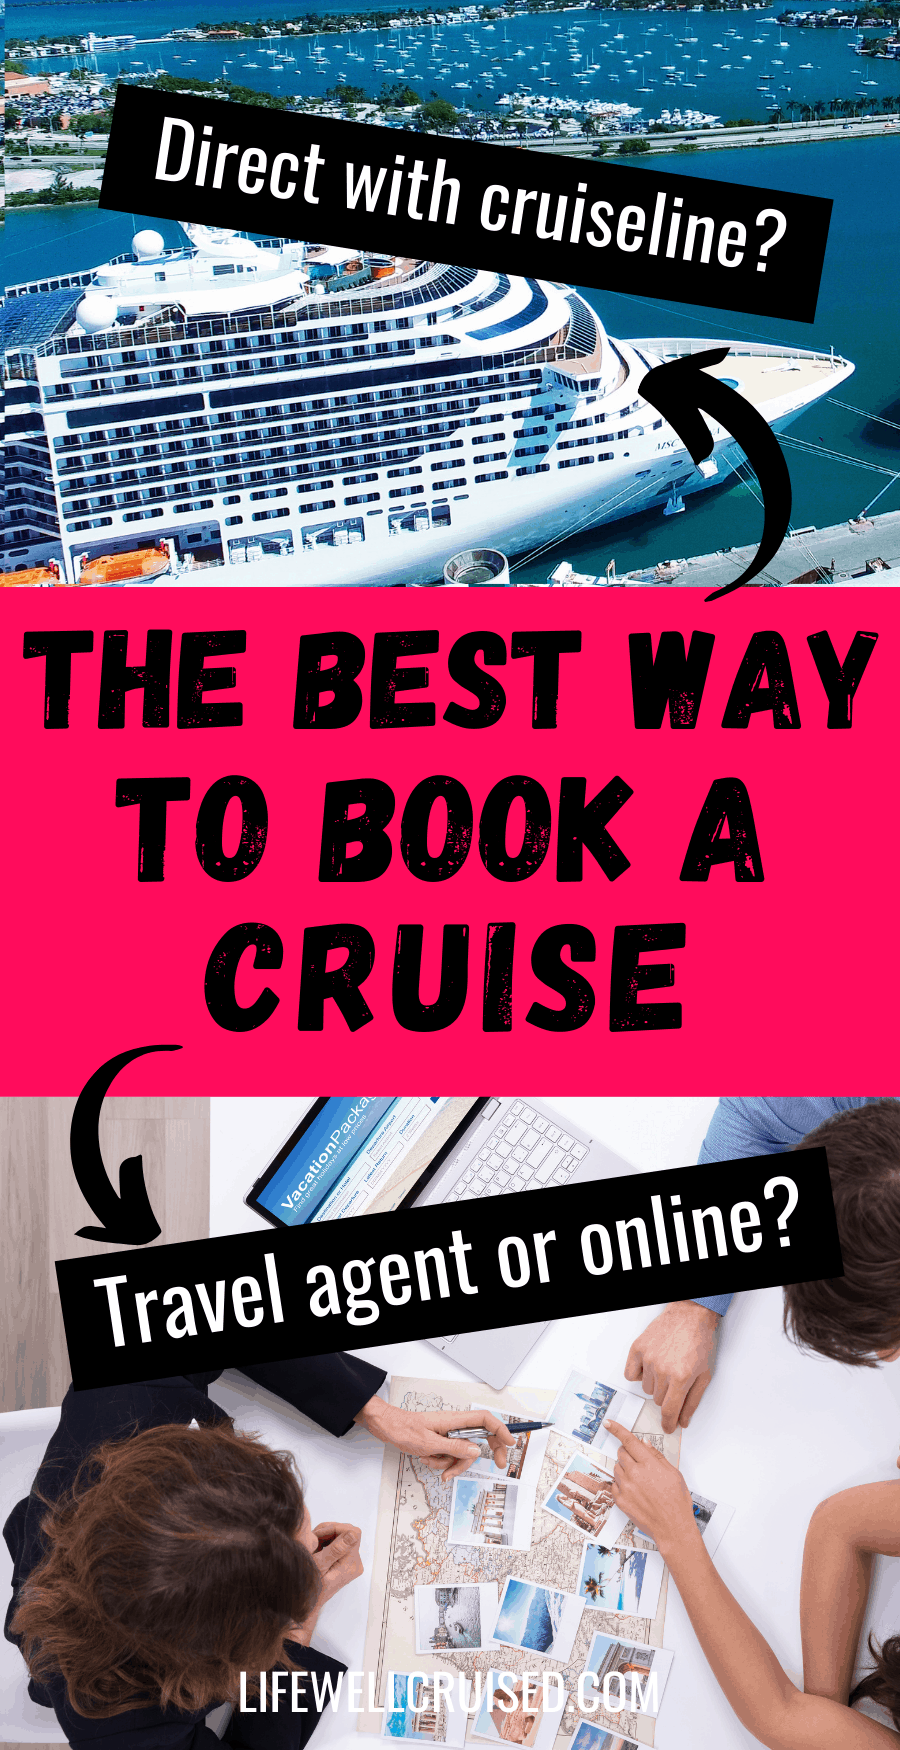 book direct with cruise line or travel agent